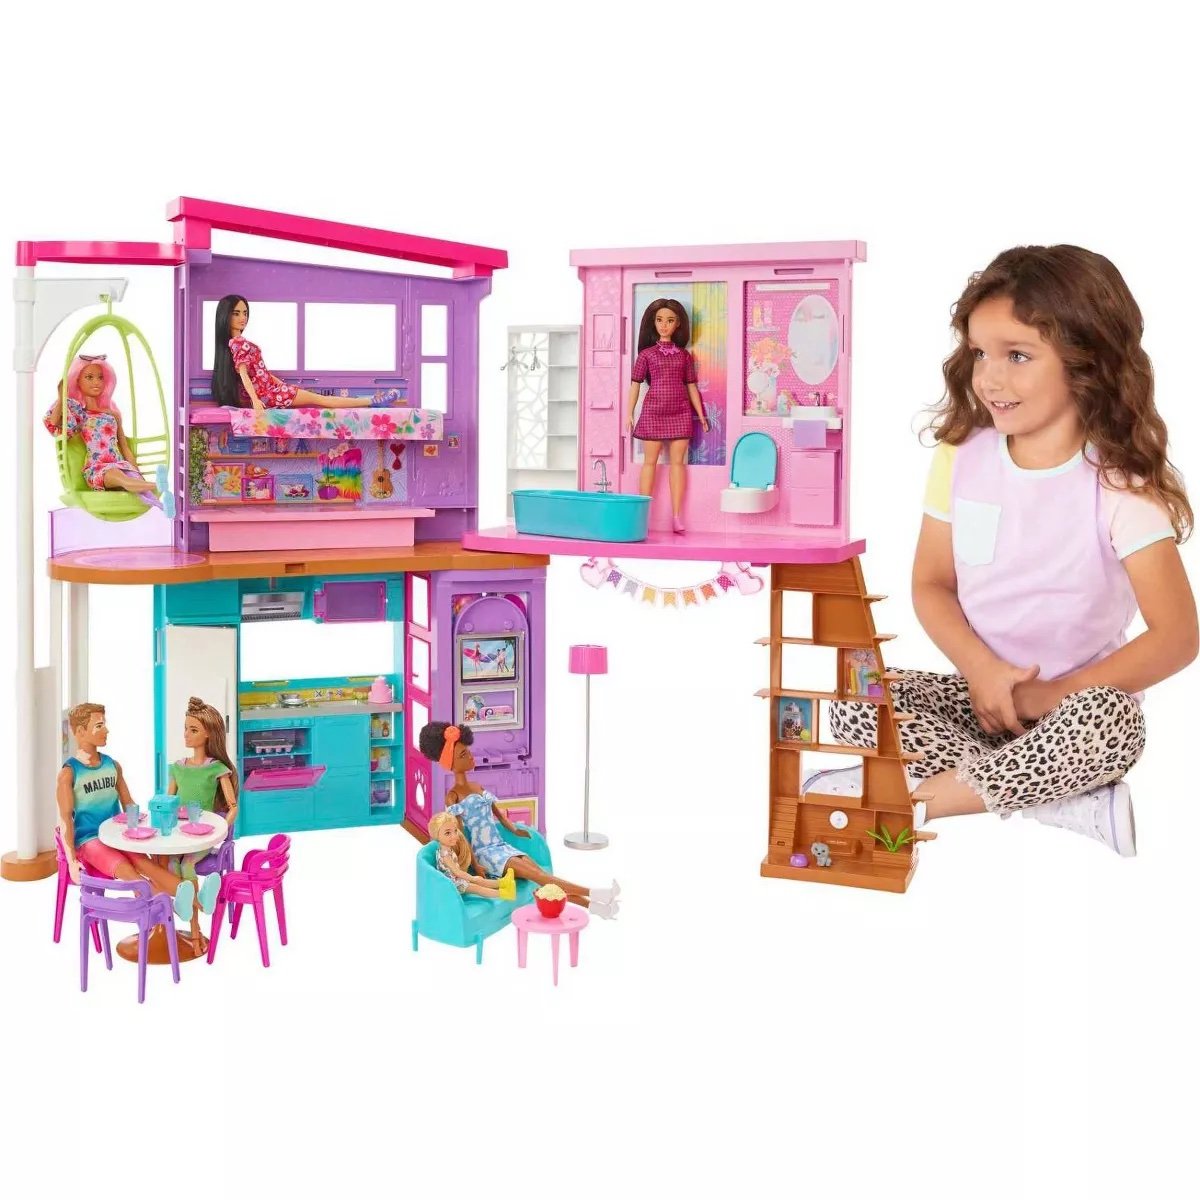 Up to 50% off Barbie toys